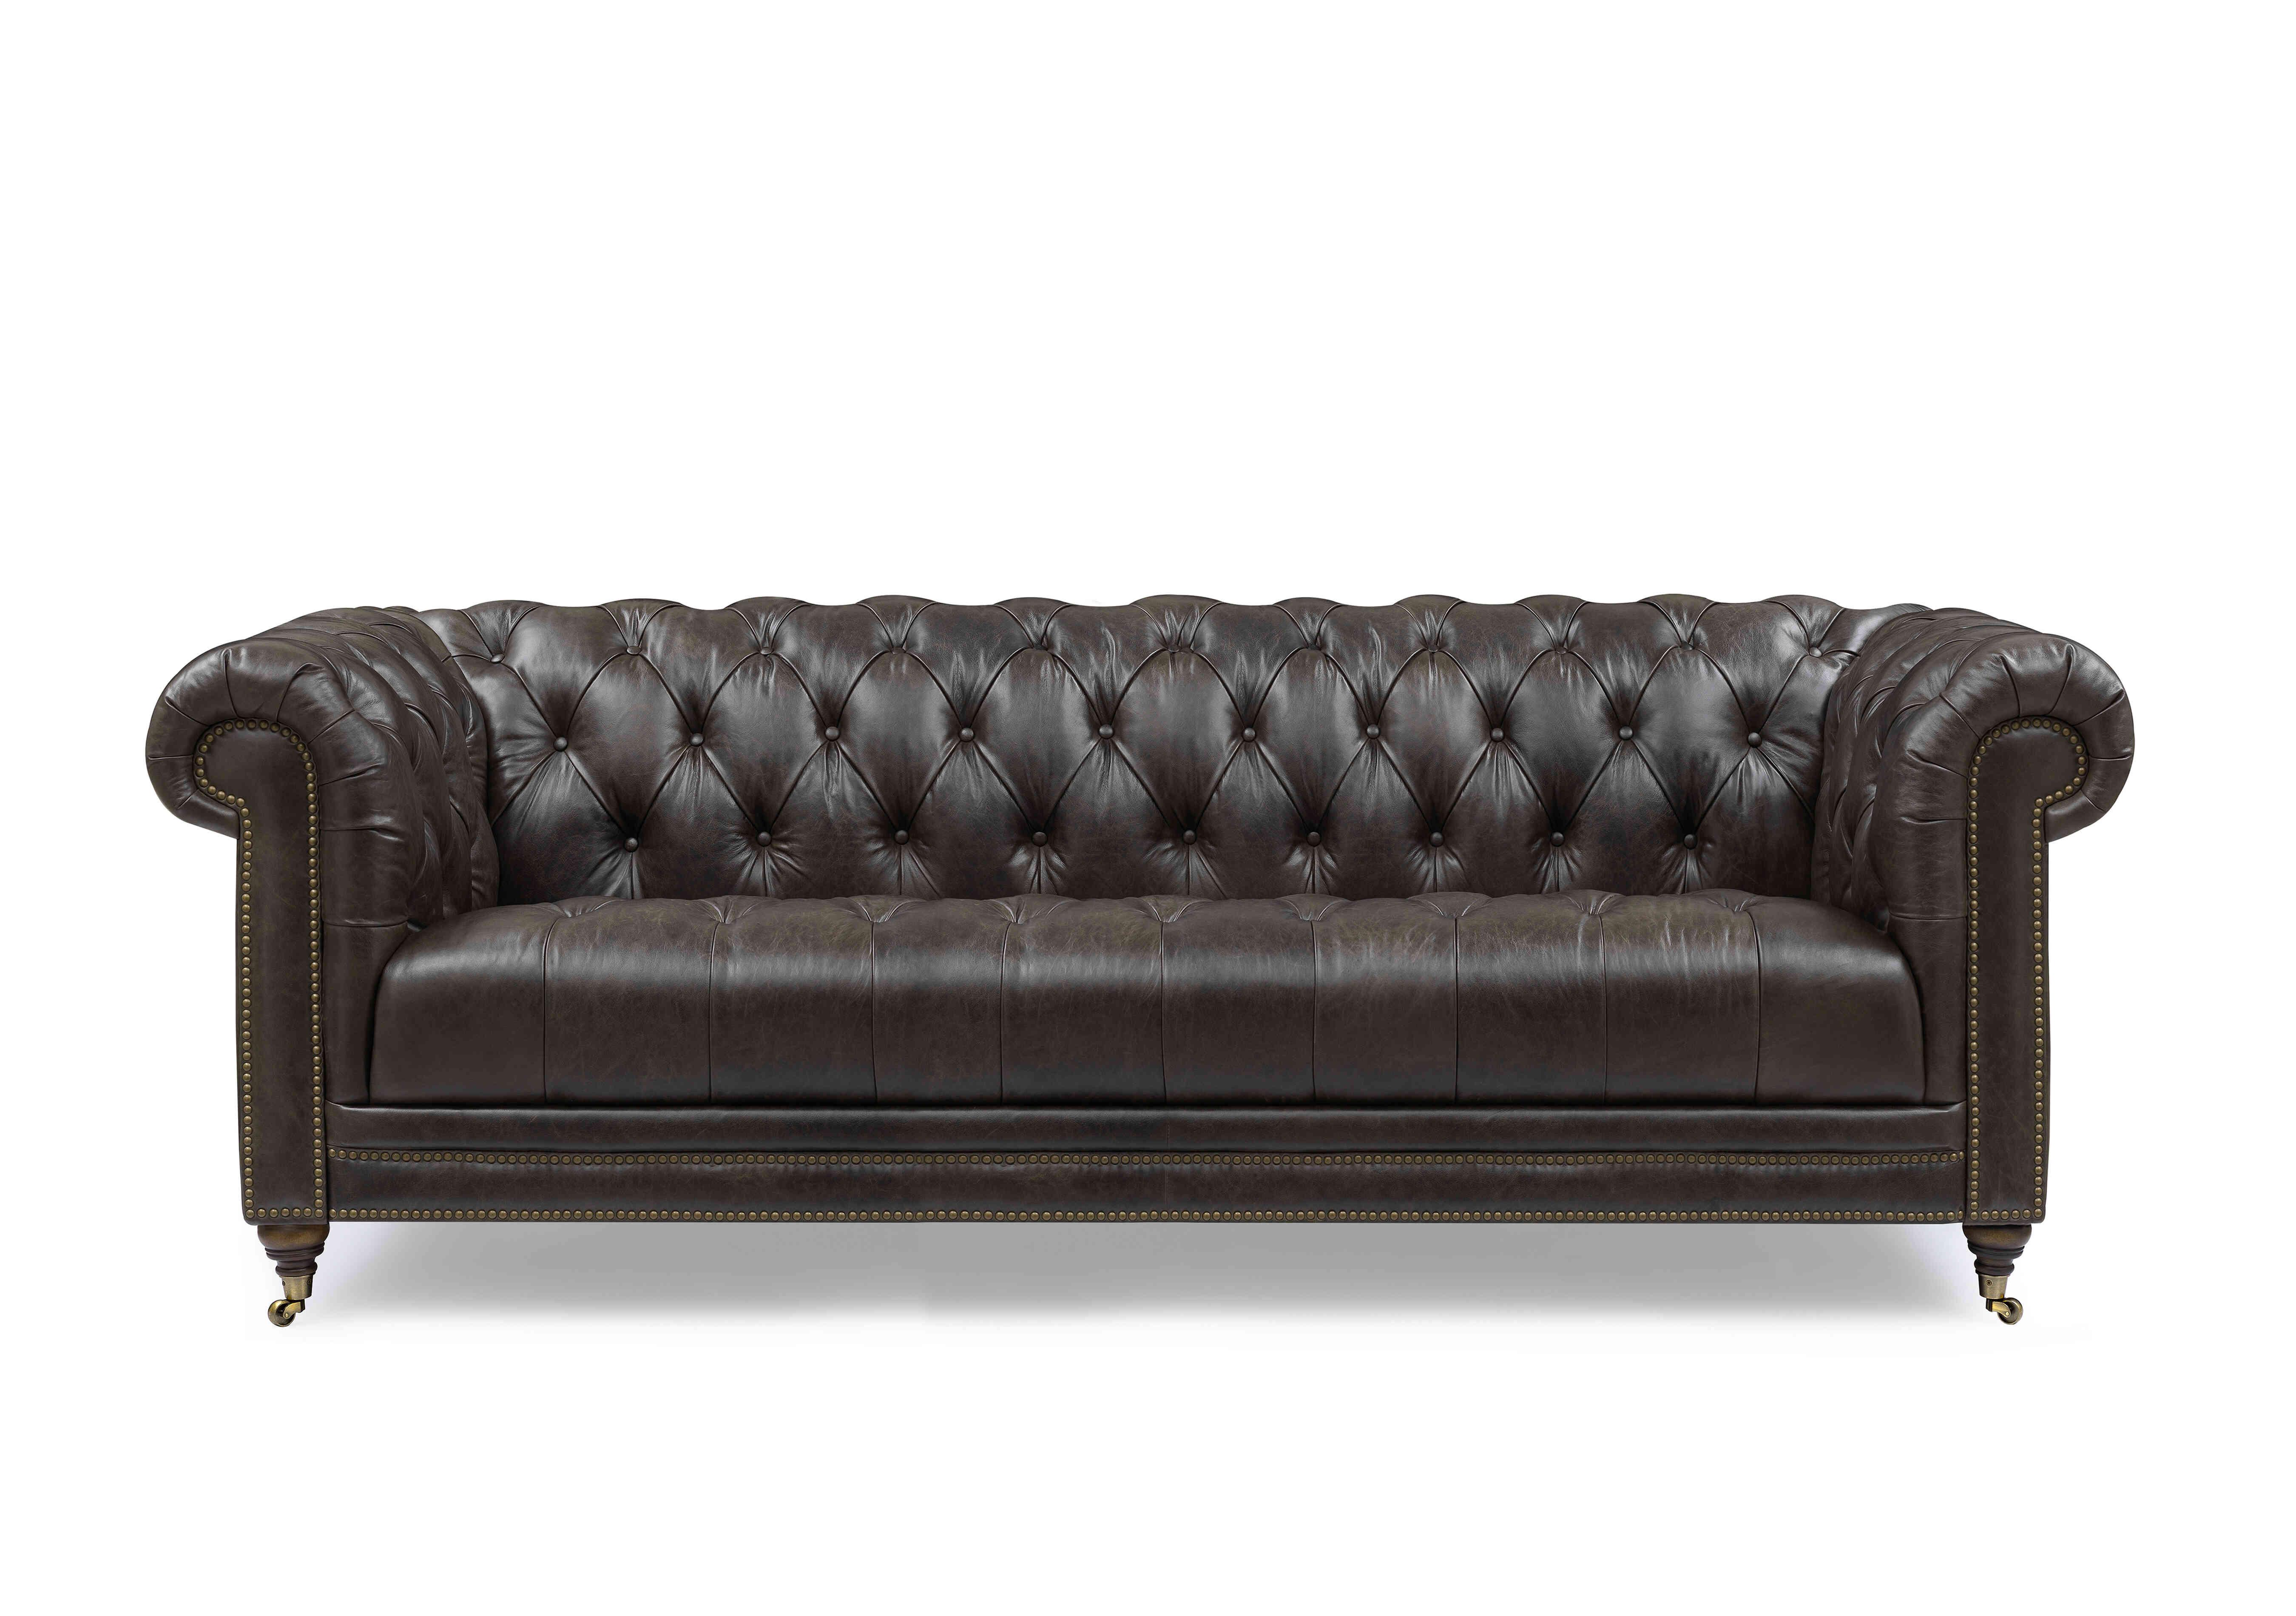 Walter 4 Seater Leather Chesterfield Sofa with USB-C in X3y1-1759ls Cannon on Furniture Village